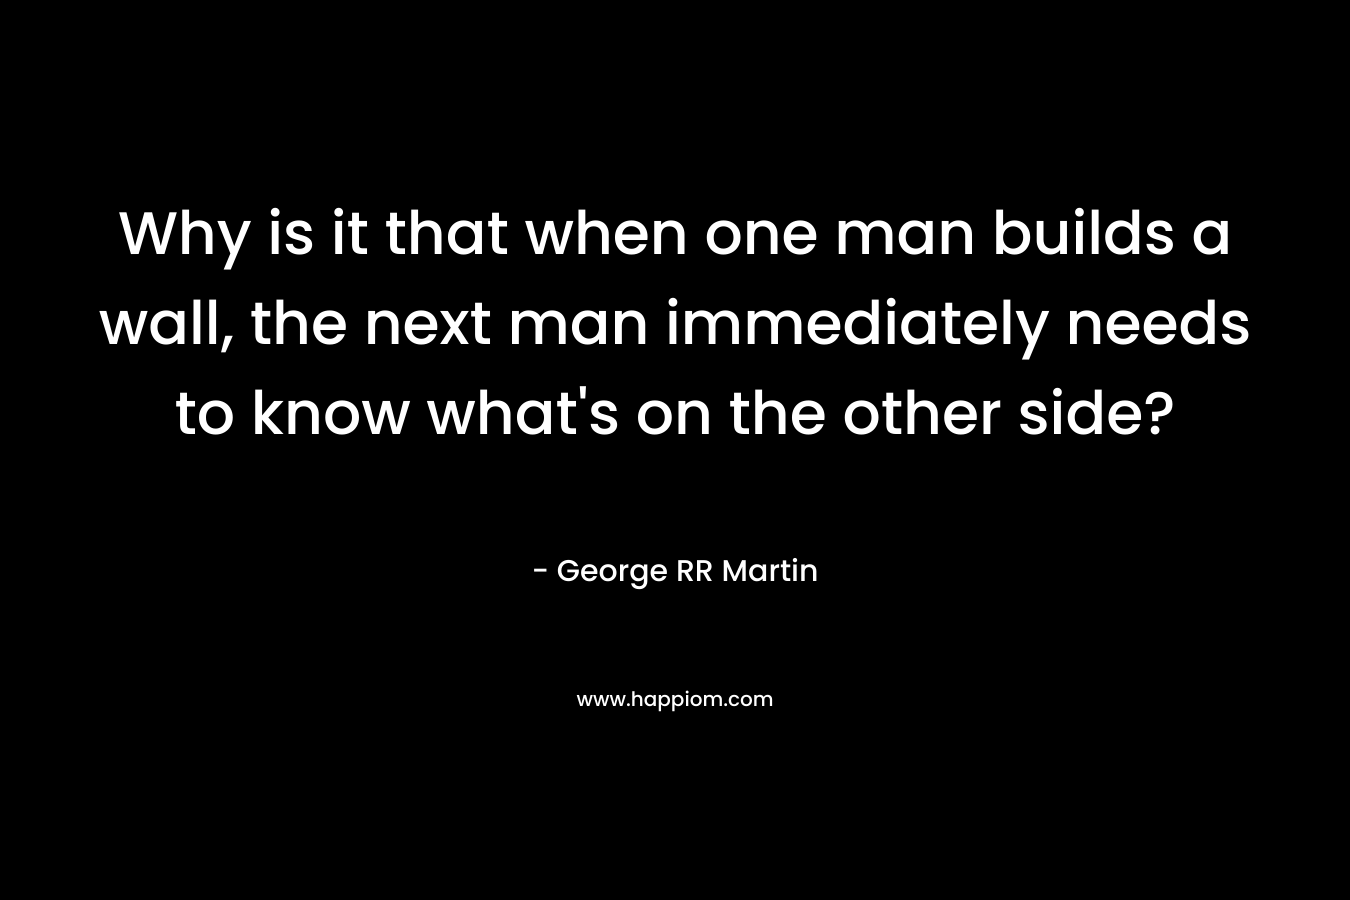 Why is it that when one man builds a wall, the next man immediately needs to know what’s on the other side? – George RR Martin